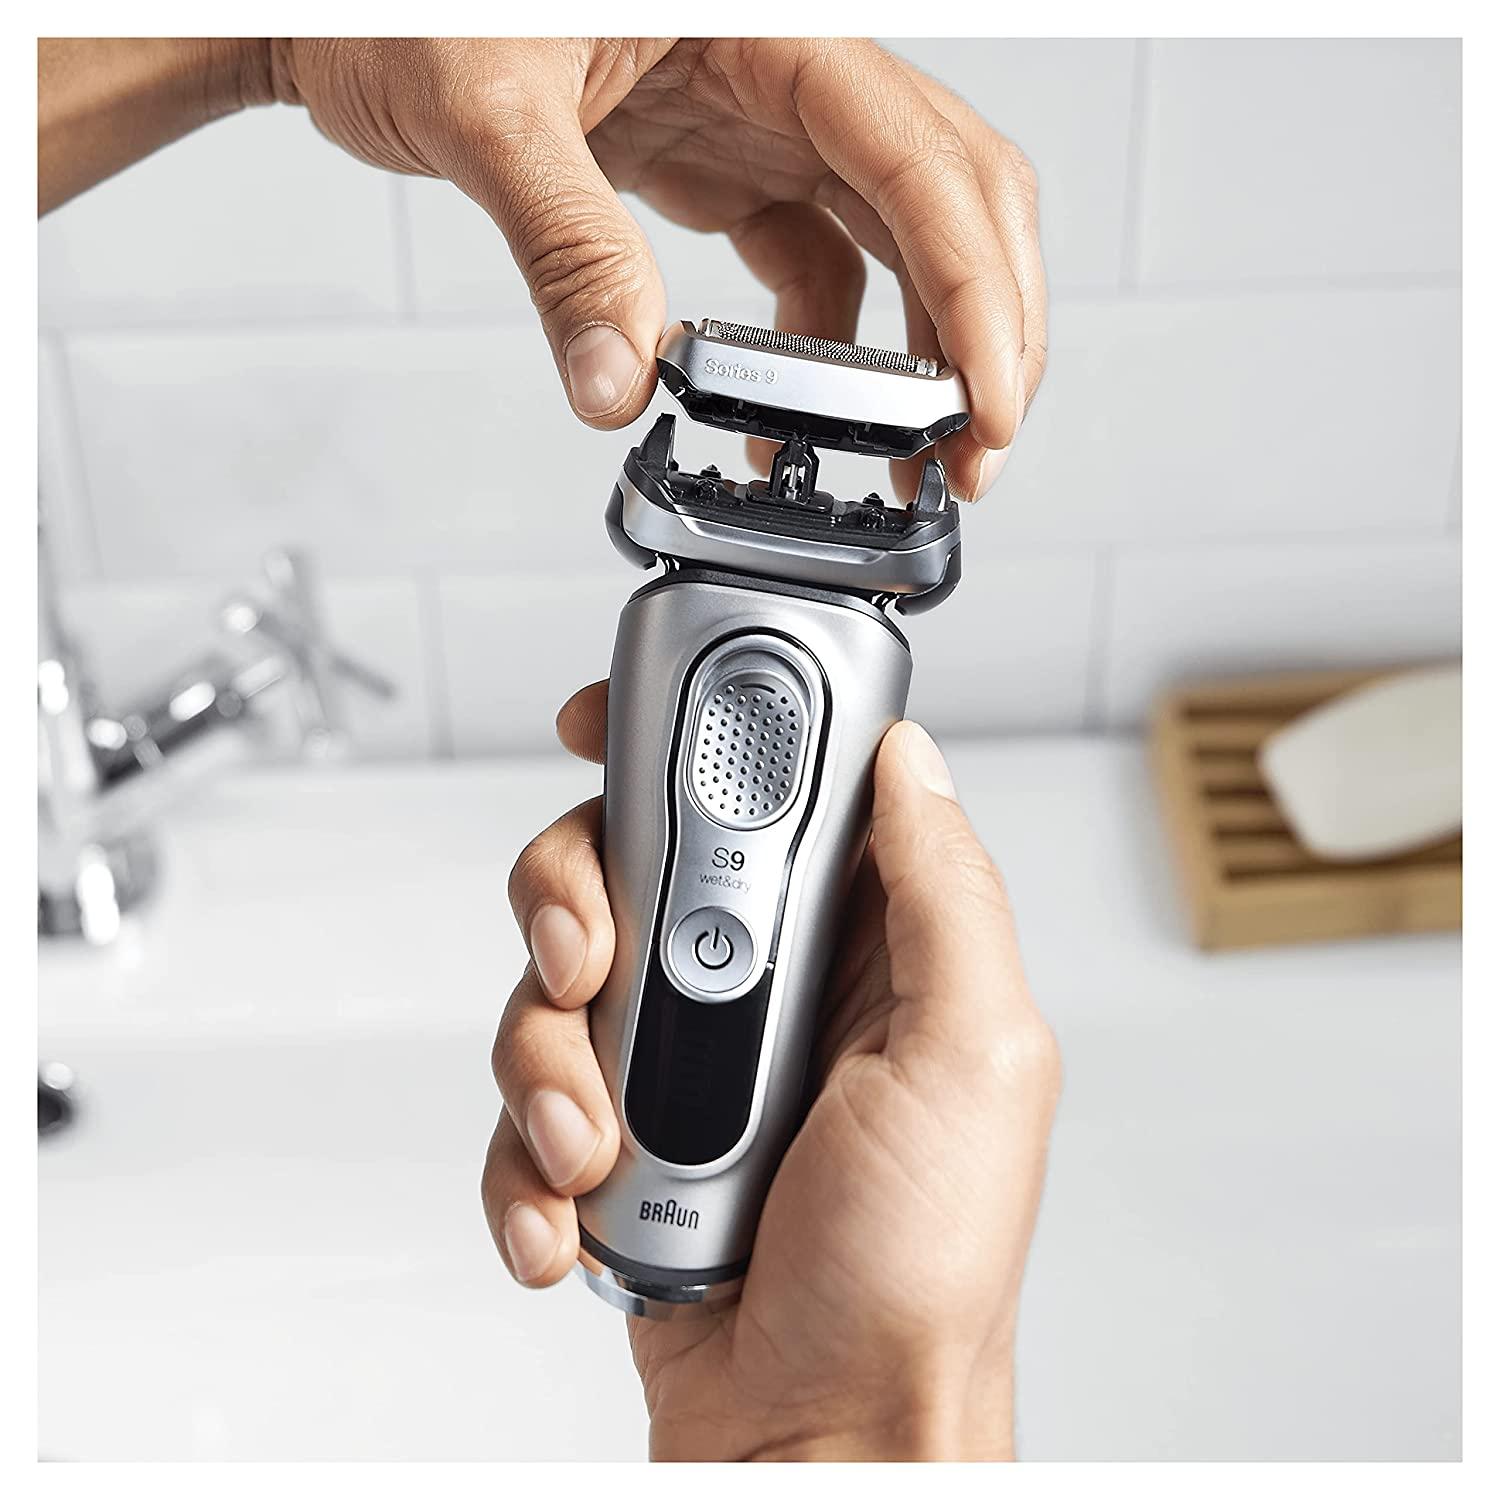 Braun Series 9 Electric Shaver Replacement Head - 92M - Compatible with All Series  9 Electric Razors 9290cc, 9291cc, 9370cc, 9293s, 9385cc, 9390cc, 9330s,  9296cc